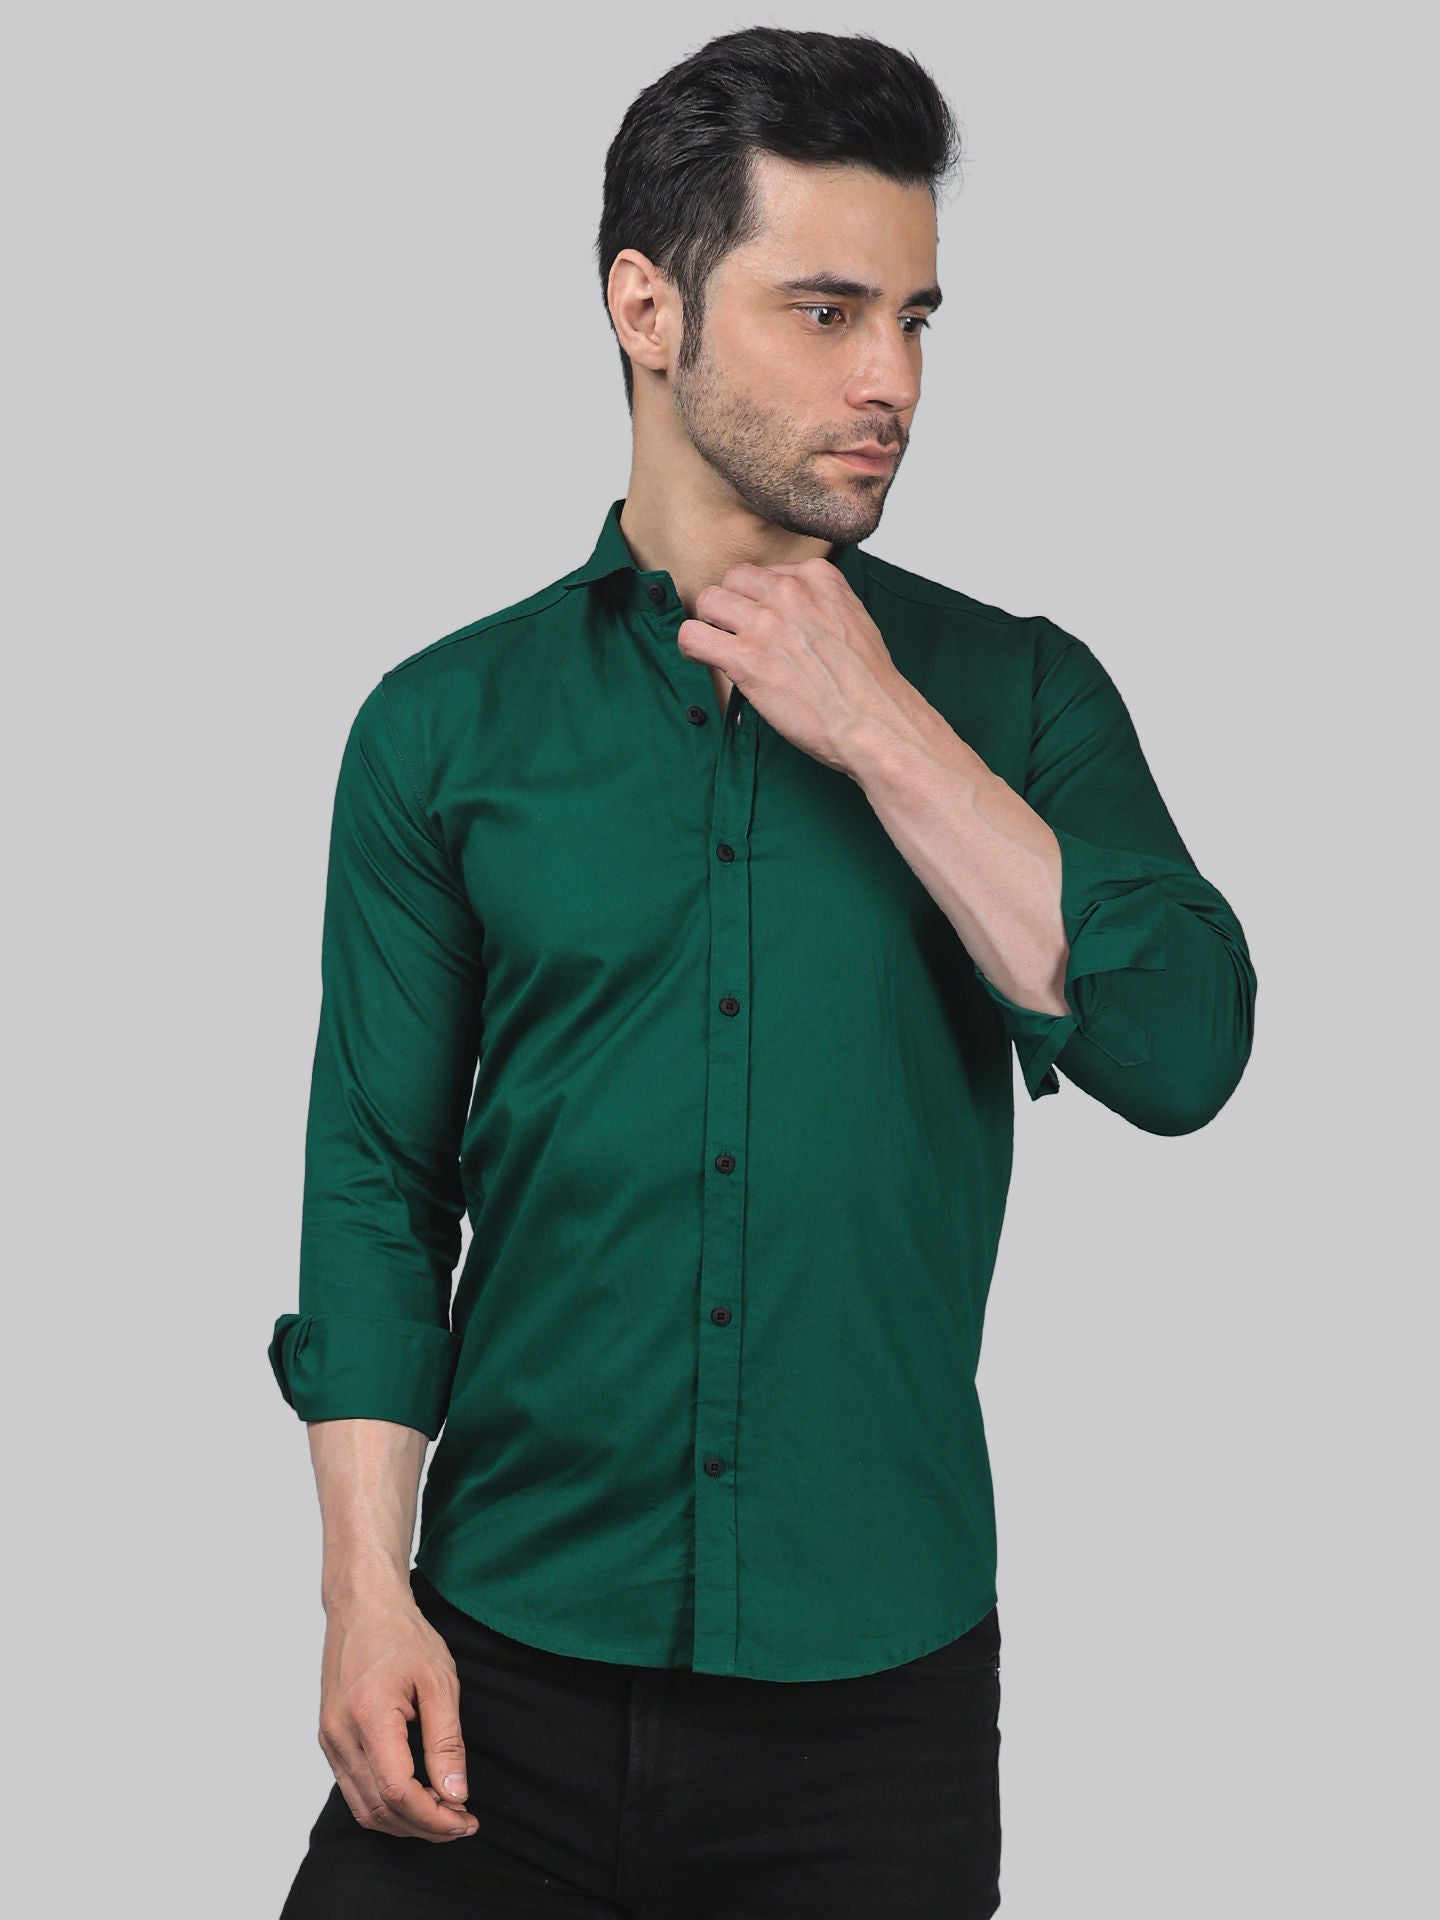 Grunge TryBuy Premium Green Cotton Casual Shirt for Men - TryBuy® USA🇺🇸